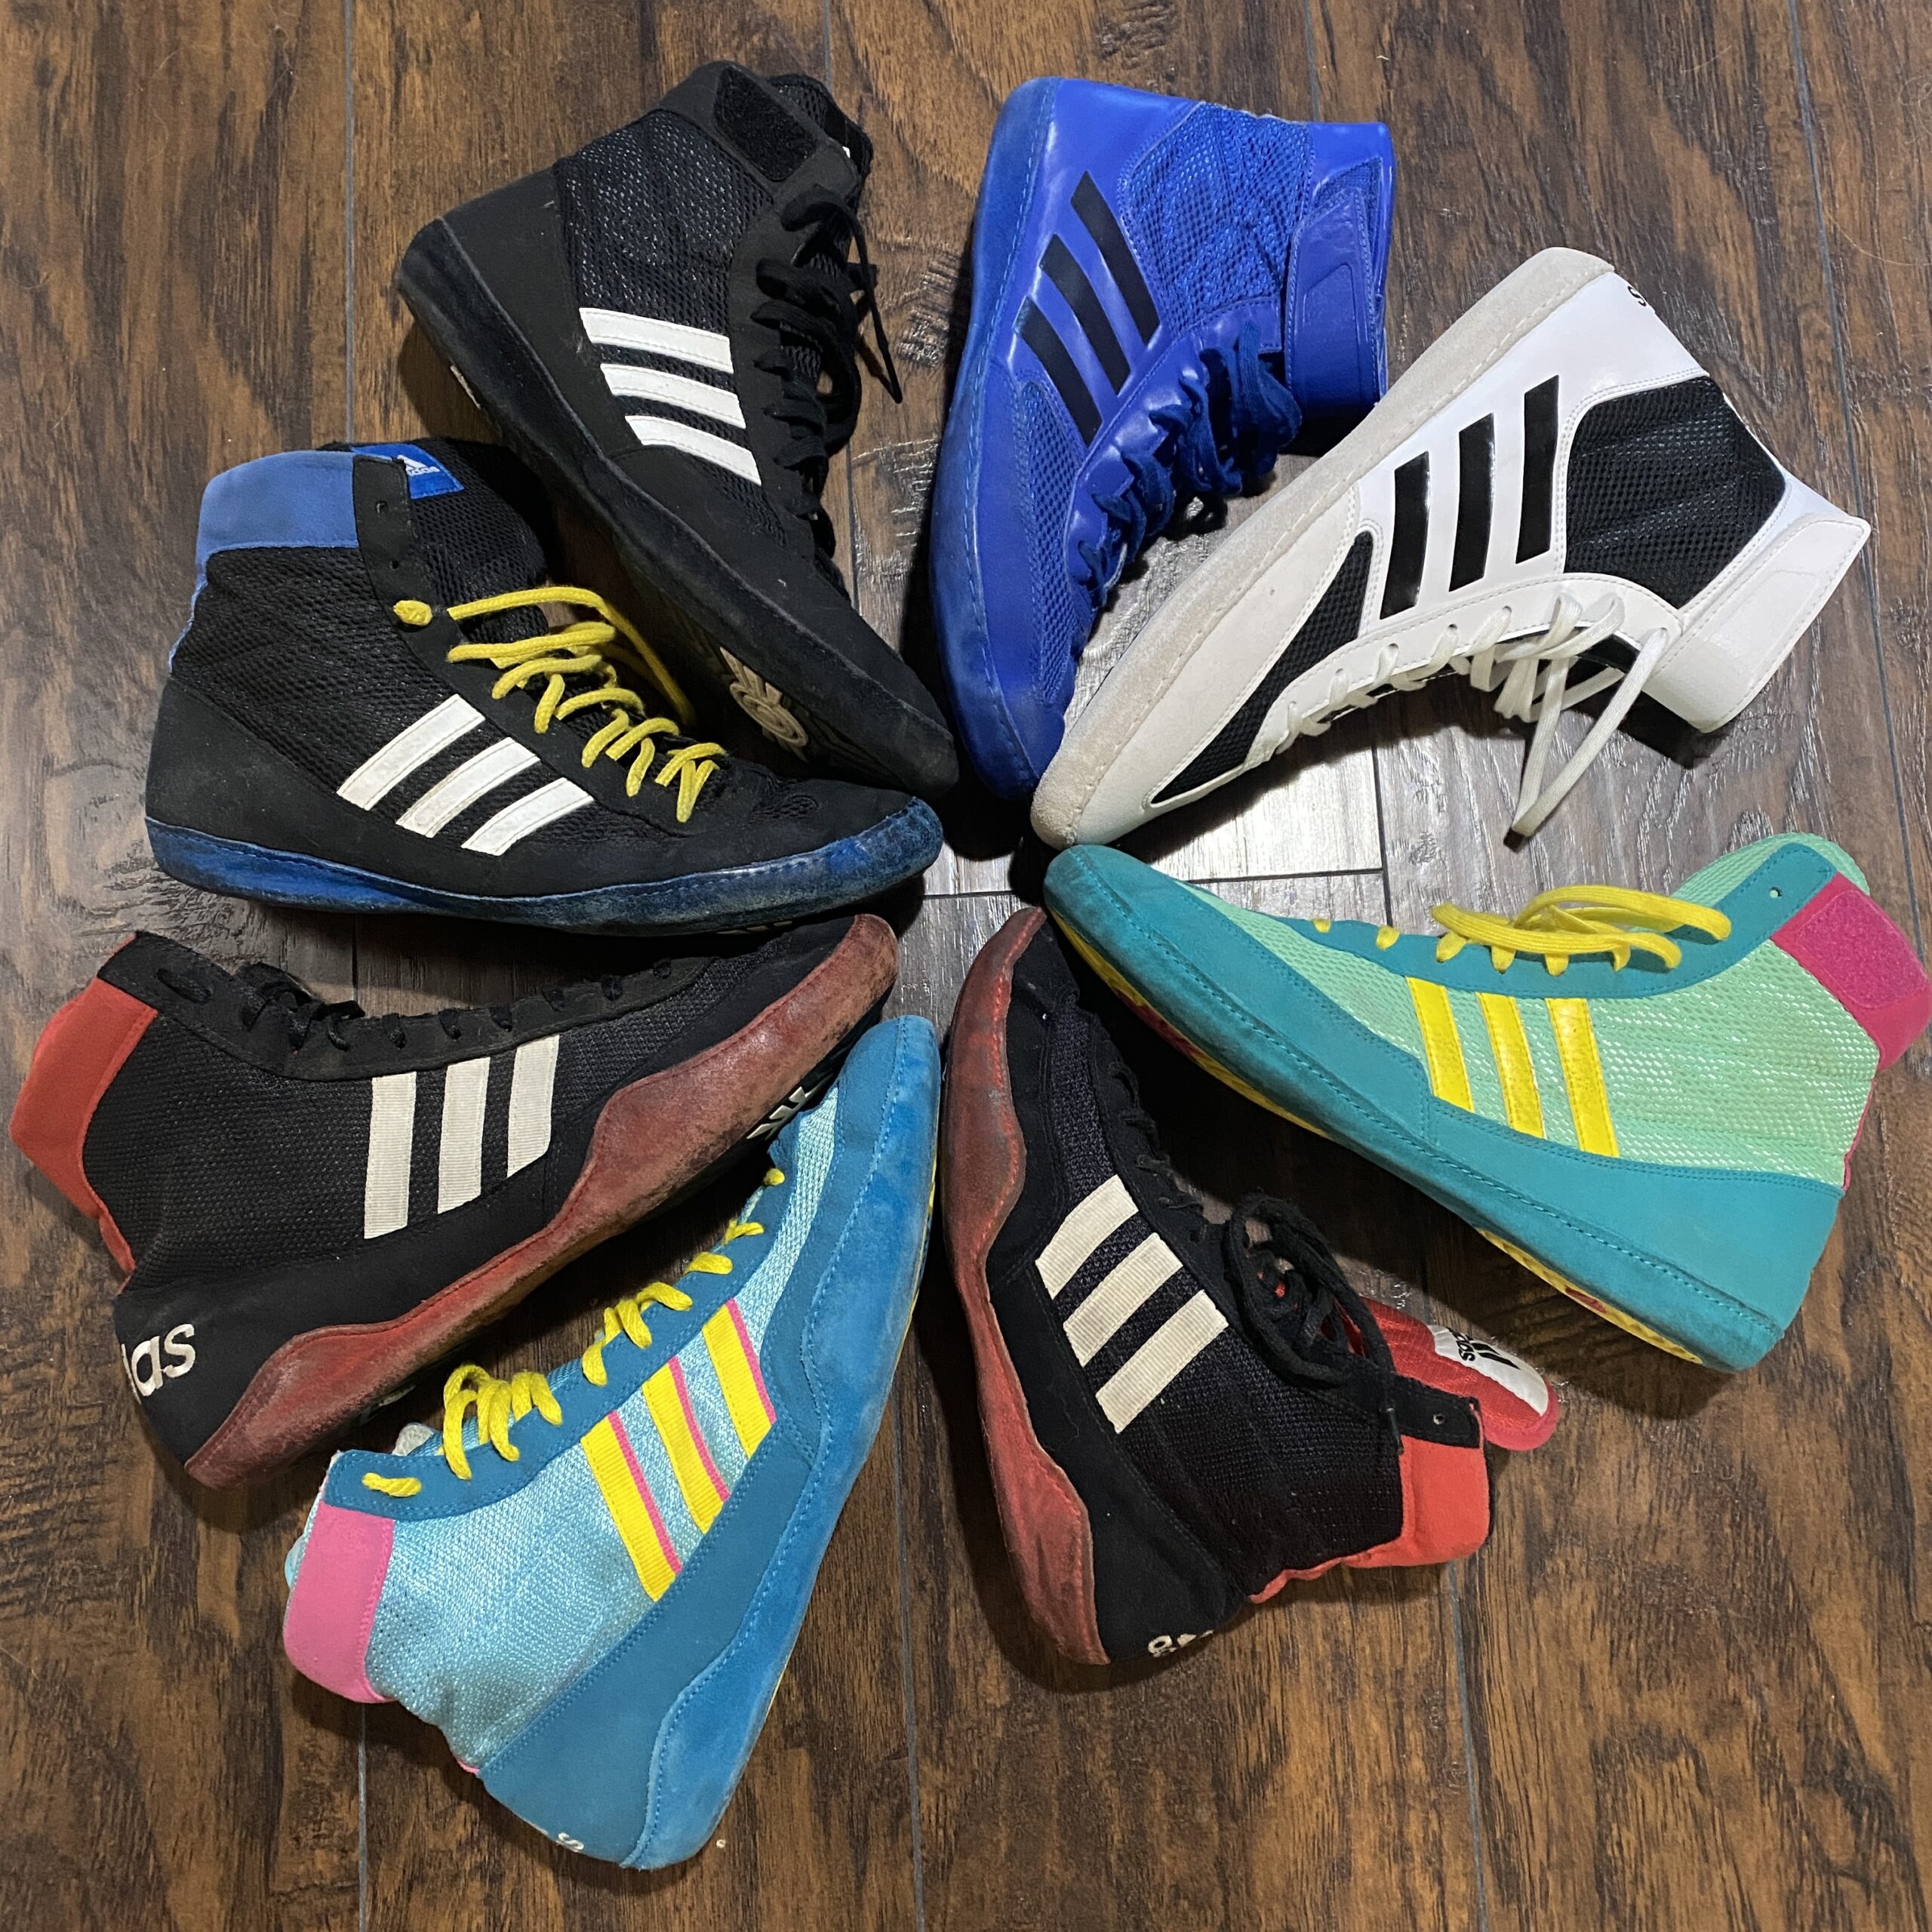 adidas combat speed wrestling shoes 8 models pictured